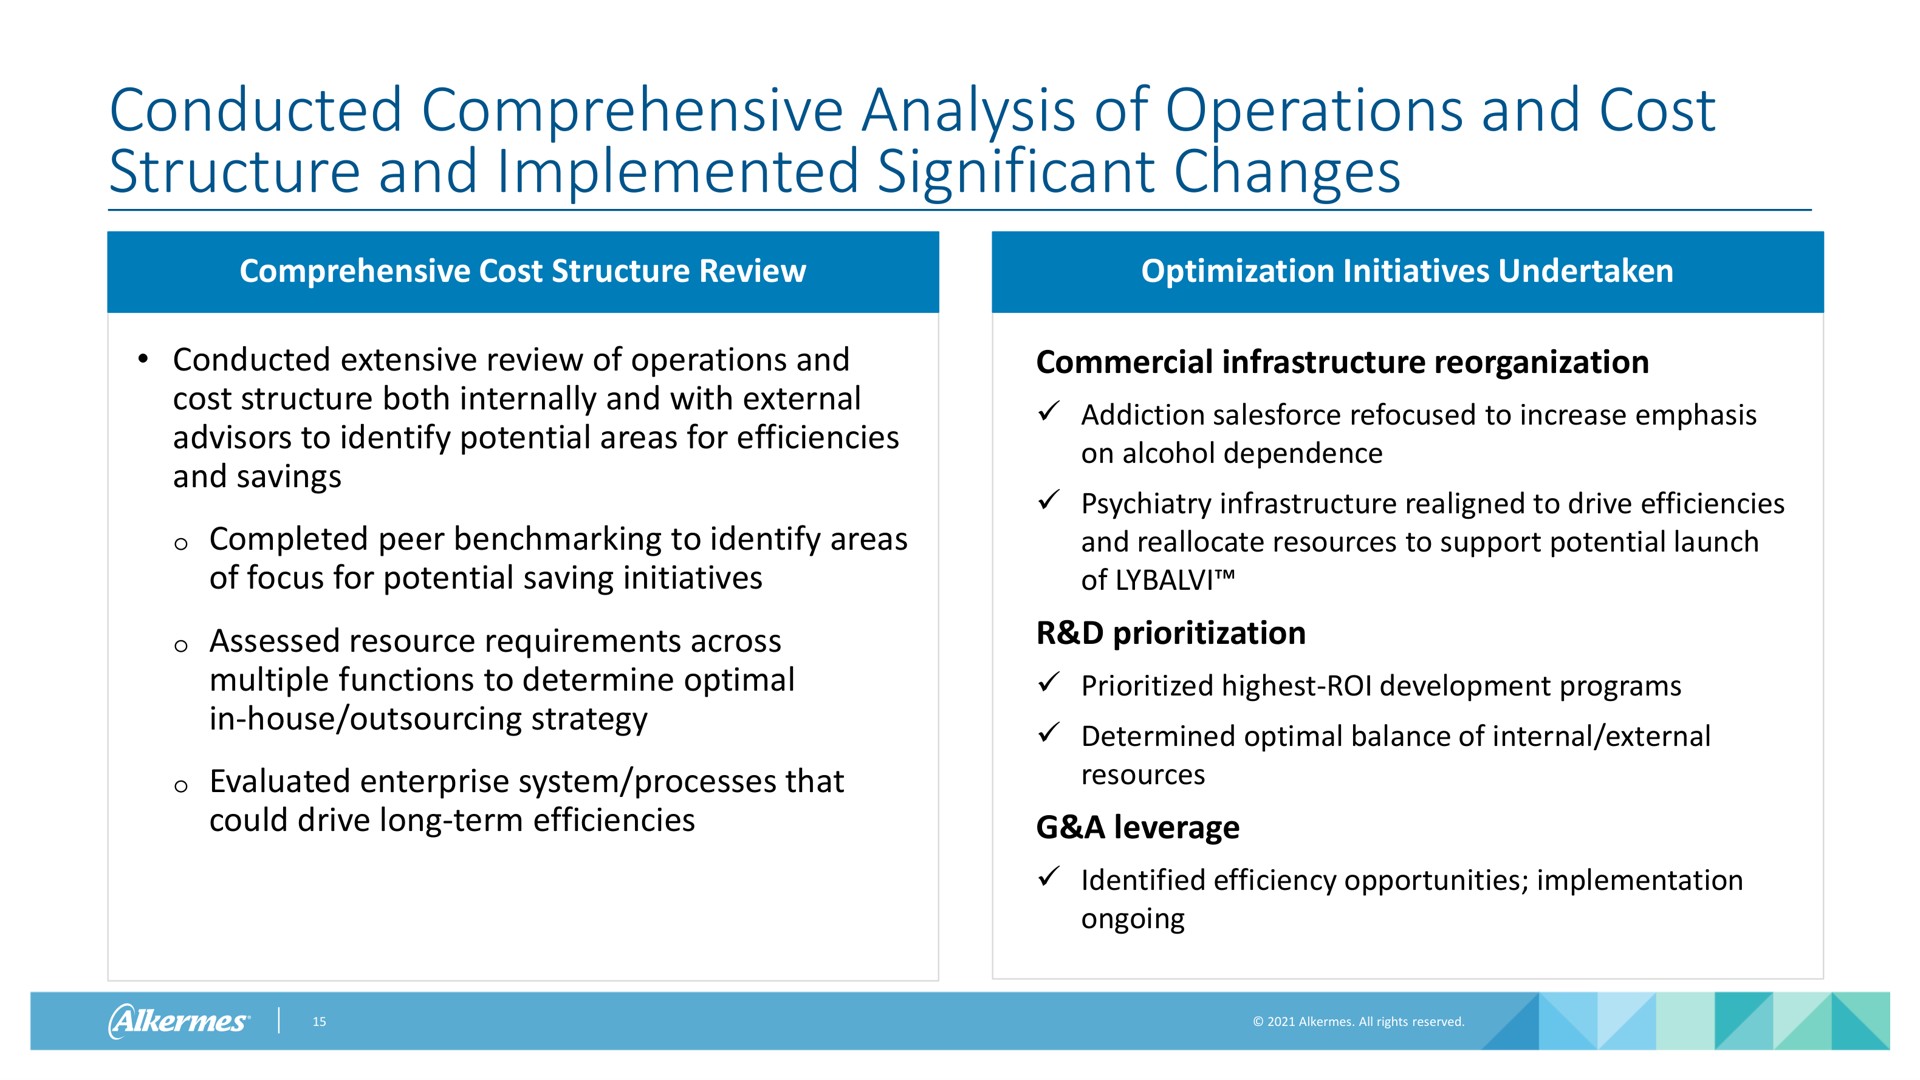 conducted comprehensive analysis of operations and cost structure and implemented significant changes comprehensive cost structure review optimization initiatives undertaken conducted extensive review of operations and cost structure both internally and with external advisors to identify potential areas for efficiencies and savings completed peer to identify areas of focus for potential saving initiatives assessed resource requirements across multiple functions to determine optimal in house strategy evaluated enterprise system processes that could drive long term efficiencies commercial infrastructure reorganization addiction refocused to increase emphasis on alcohol dependence psychiatry infrastructure realigned to drive efficiencies and reallocate resources to support potential launch of highest roi development programs determined optimal balance of internal external resources a leverage identified efficiency opportunities implementation ongoing | Alkermes